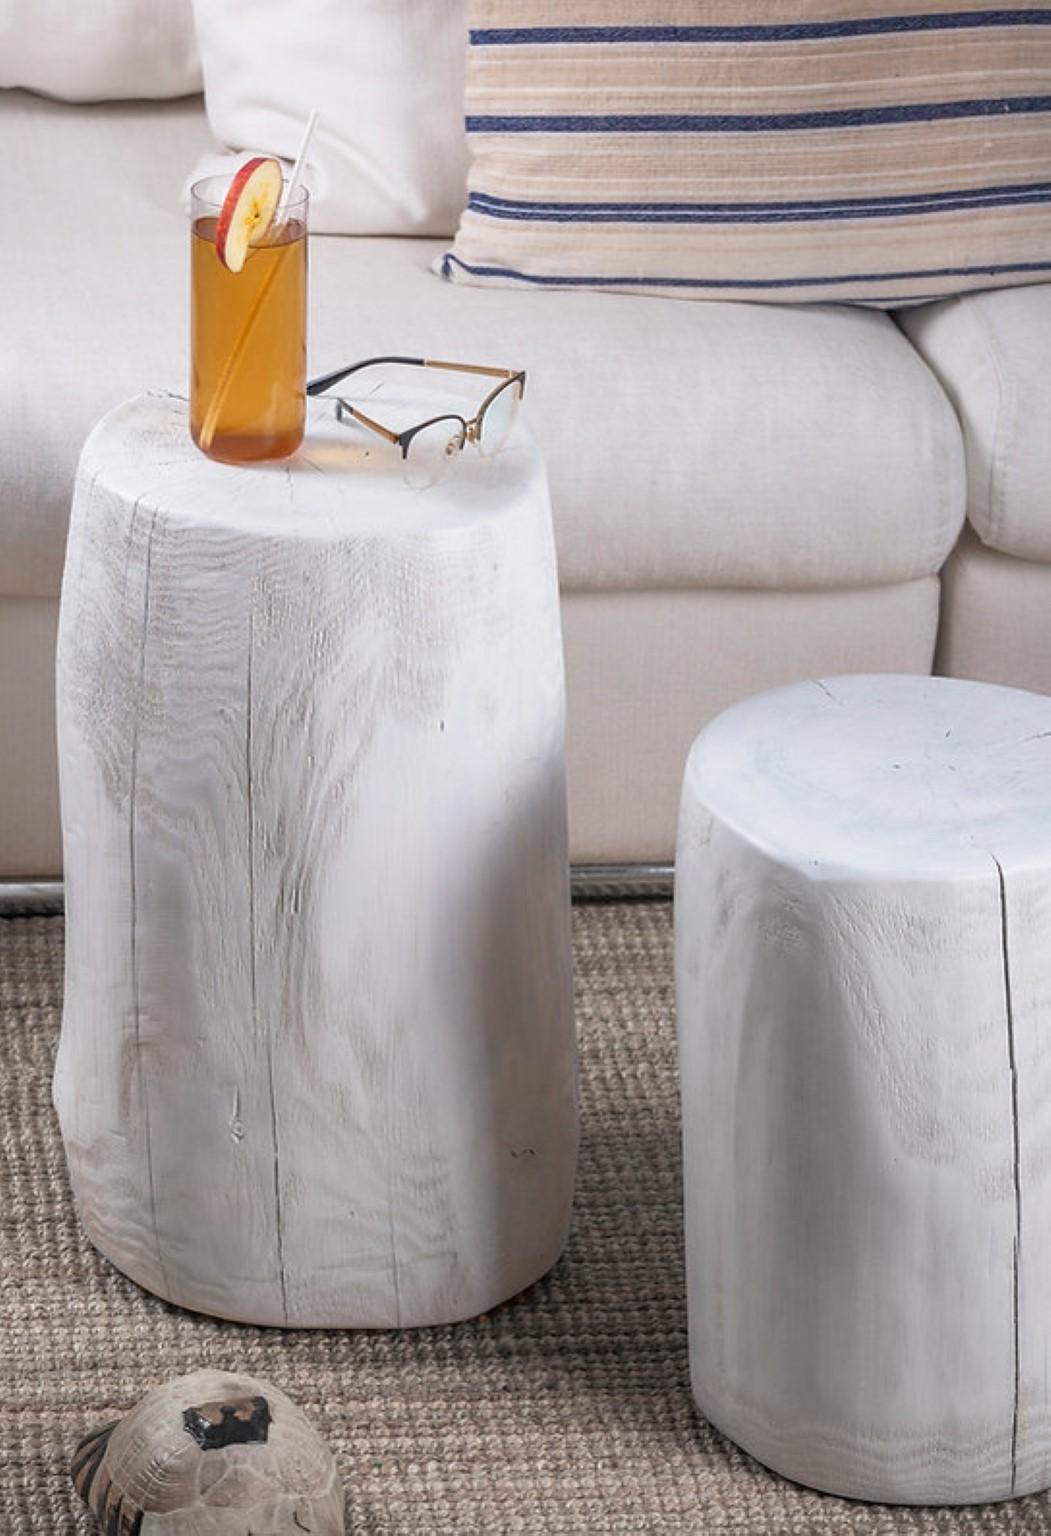 White Kabuk coffee table by Rectangle Studio
Dimensions: W 27 x H 49 cm 
Materials: Massive pinewood and natural wood oil

Kabuk is an alternative product with sculptural appearance which can be used as a coffee table and a bedside table with